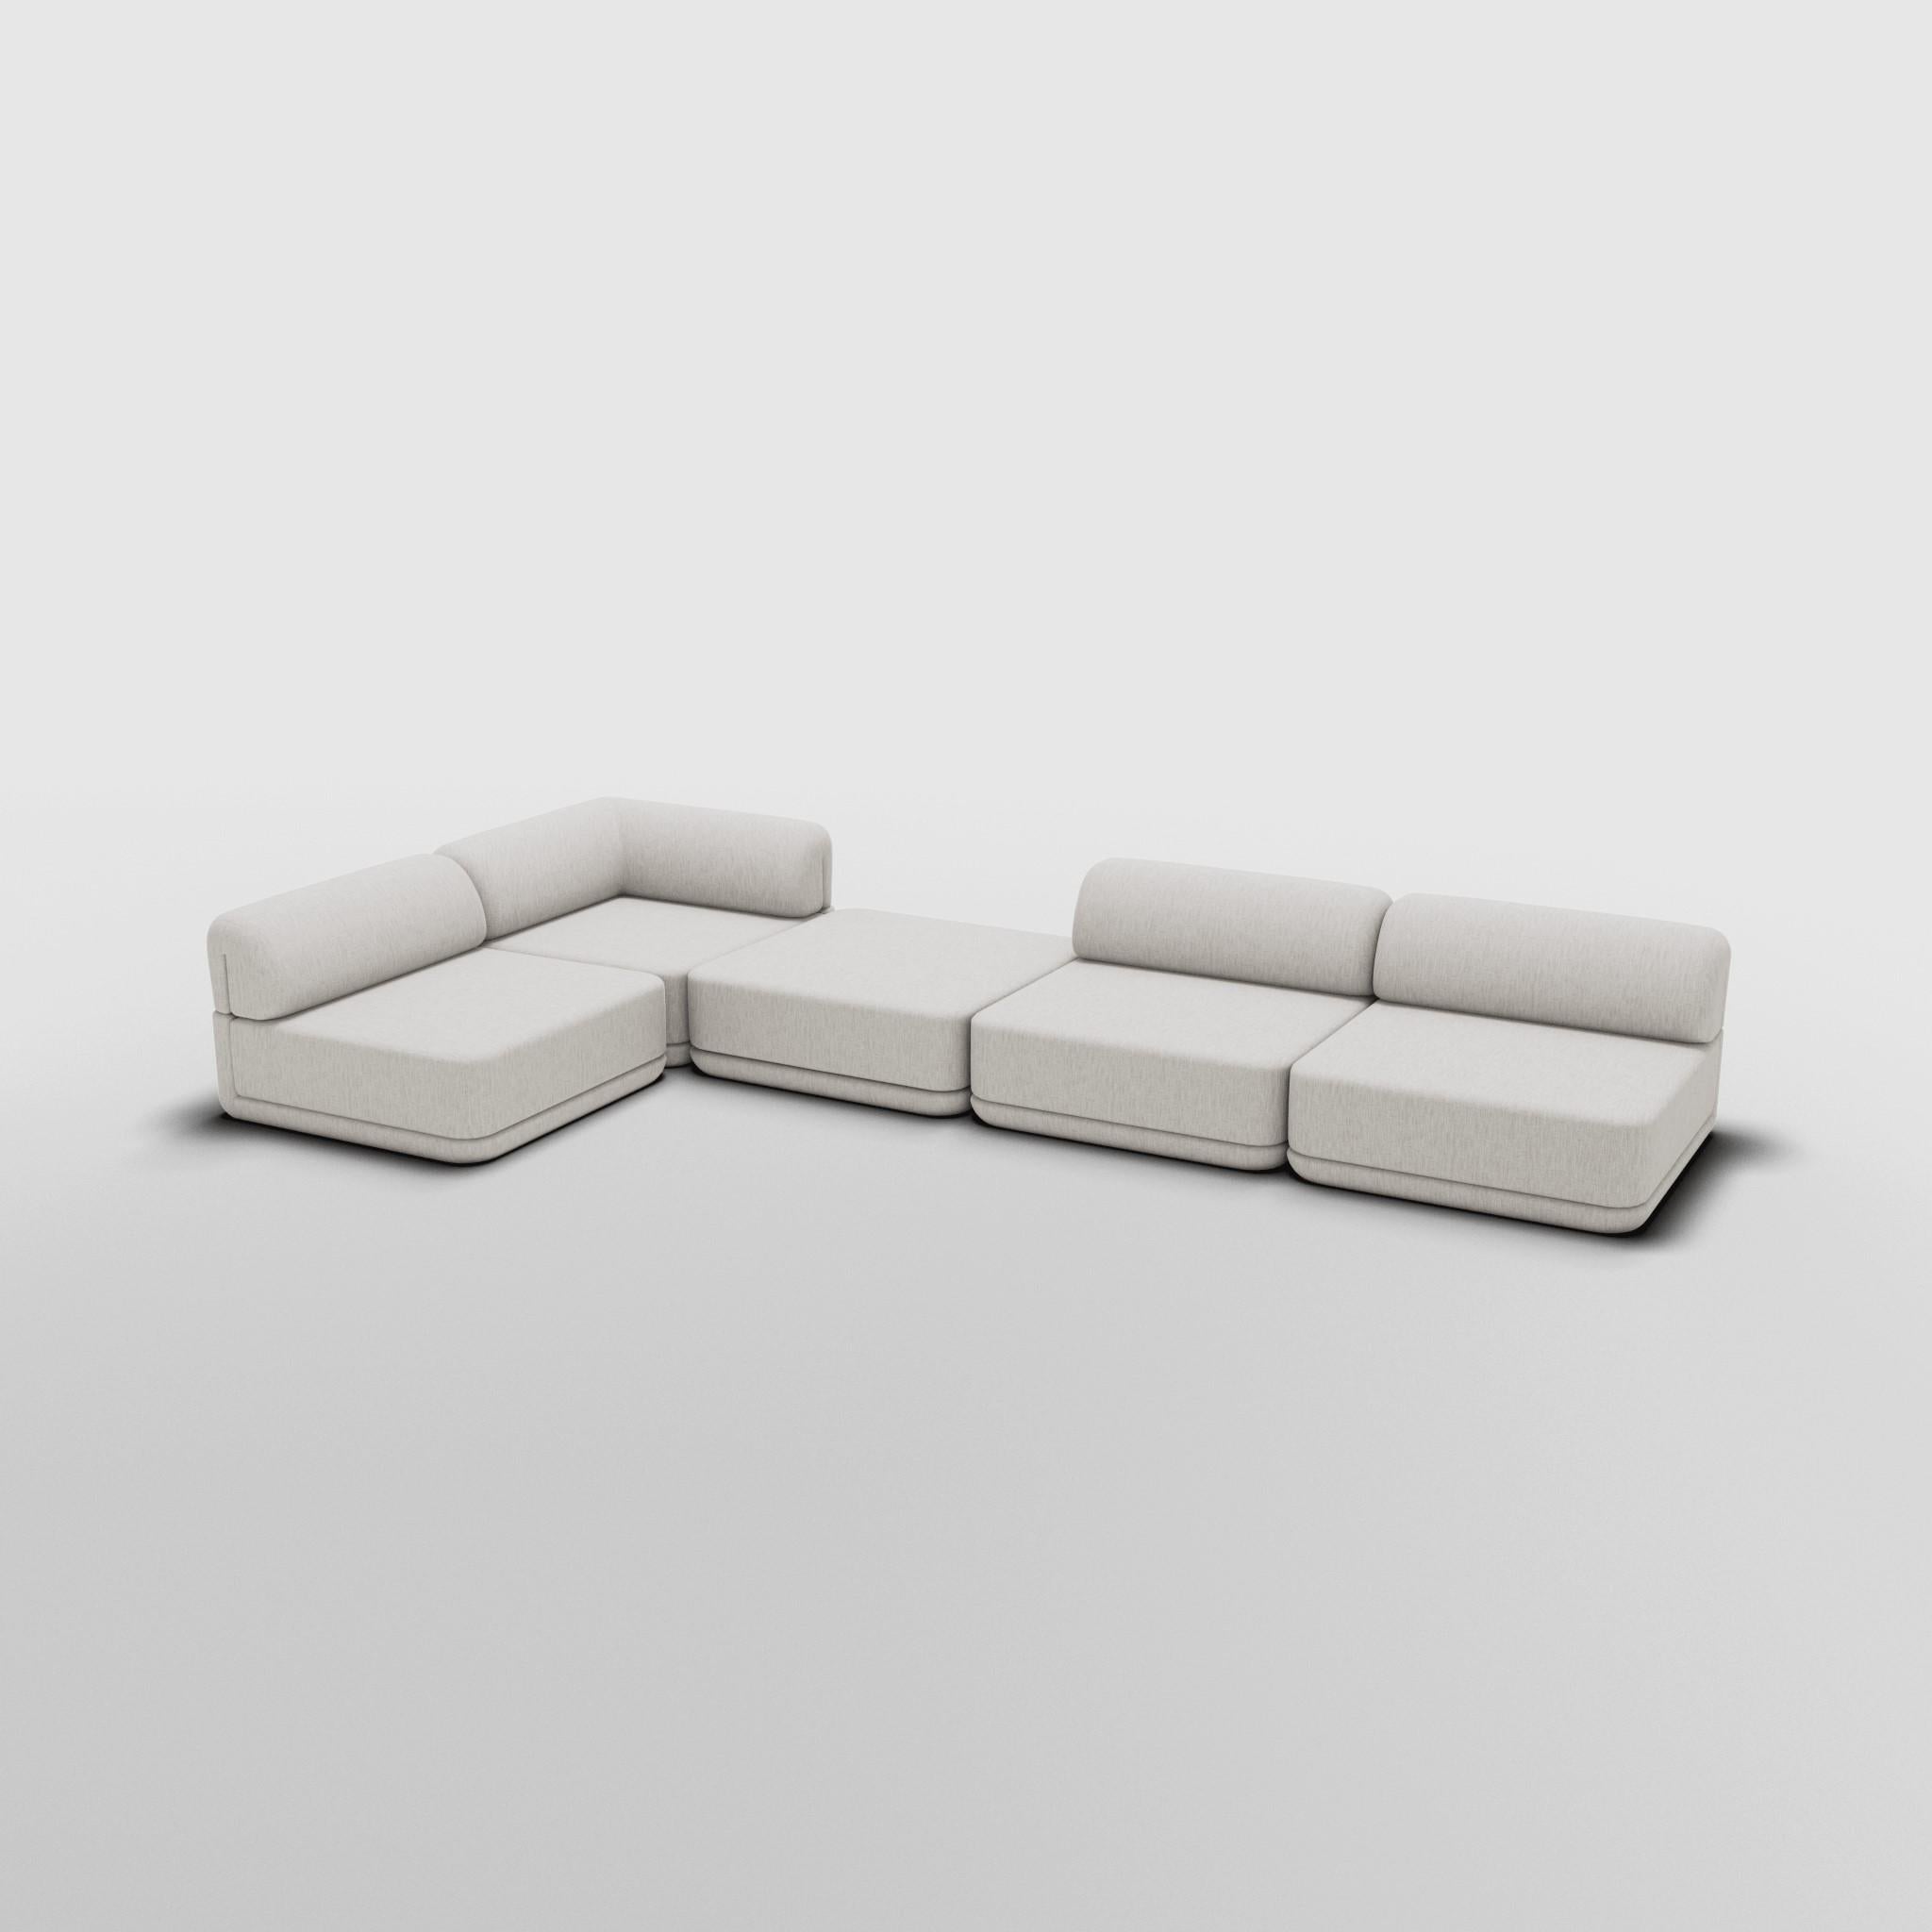 Contemporary The Cube Sofa - Corner Lounge Mix Sectional For Sale